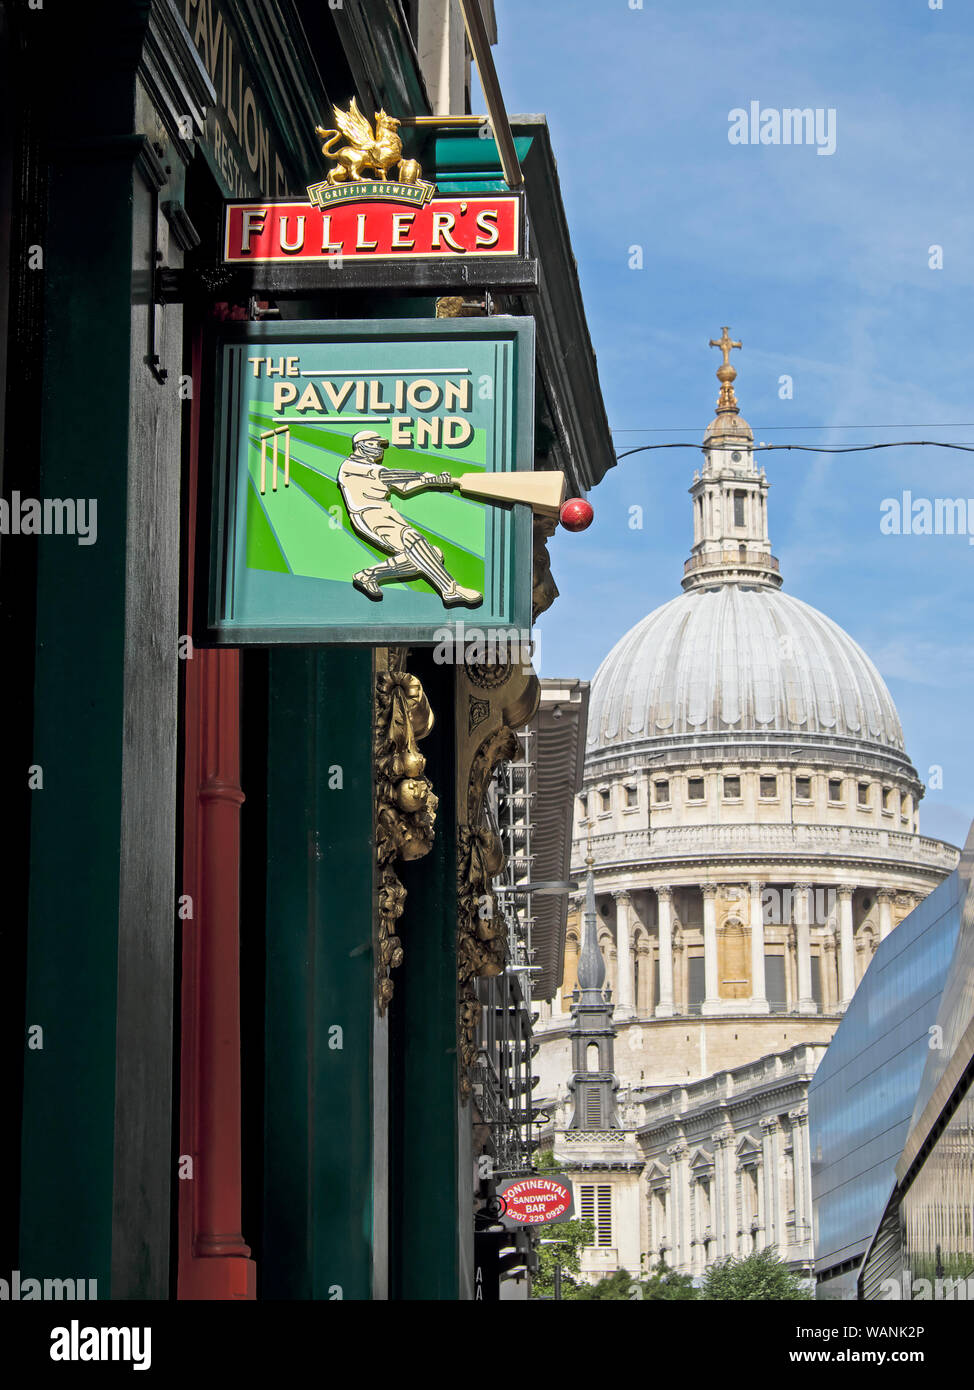 St Pauls Cathedral and vertical view of The Pavilion End pub & Fullers brewery sign in Watling Street City of London EC4 England UK  KATHY DEWITT Stock Photo